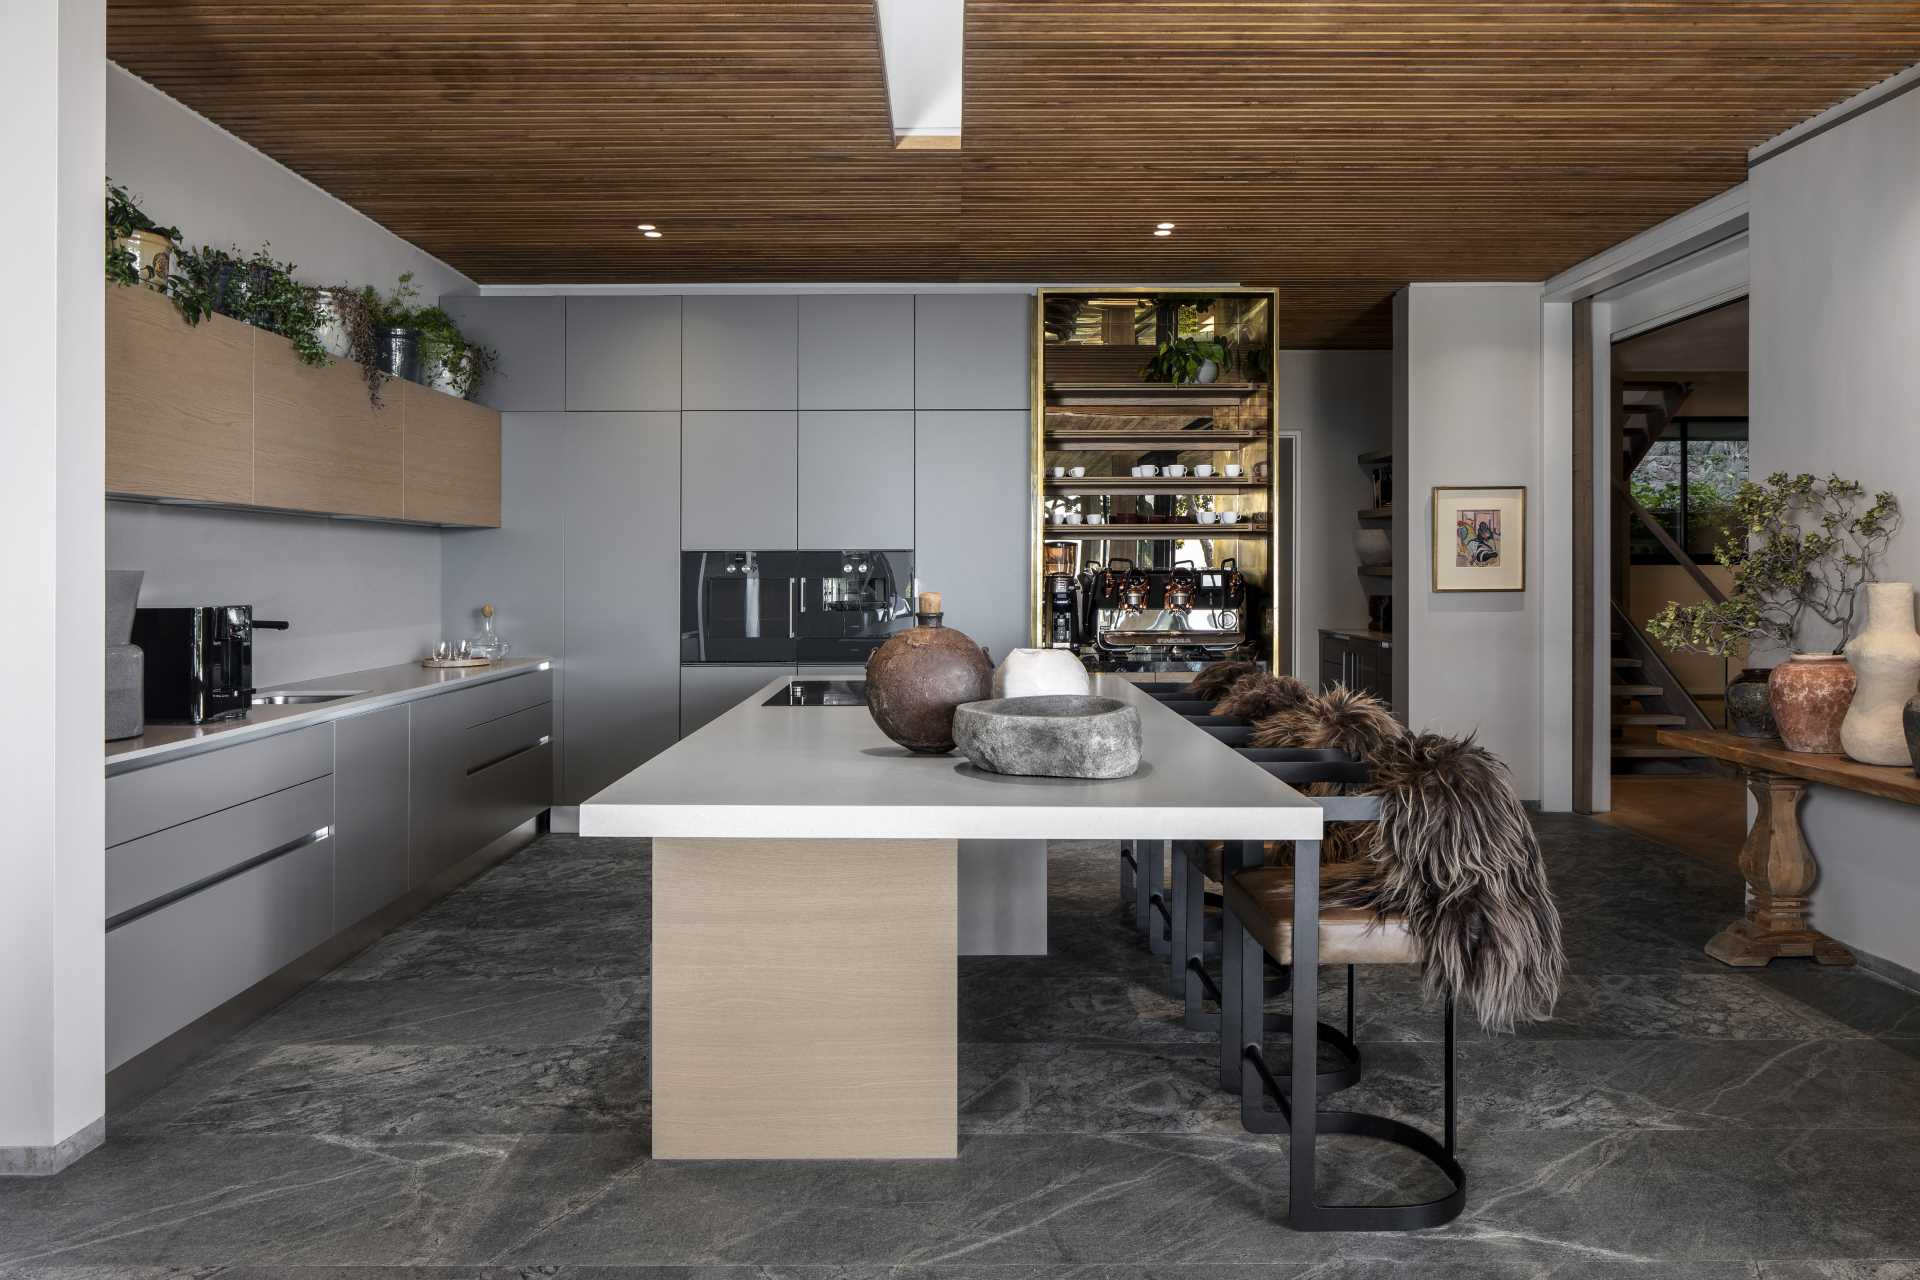 In this modern kitchen, minimalist matte grey cabinets line the walls, while the island adds counter ،e.